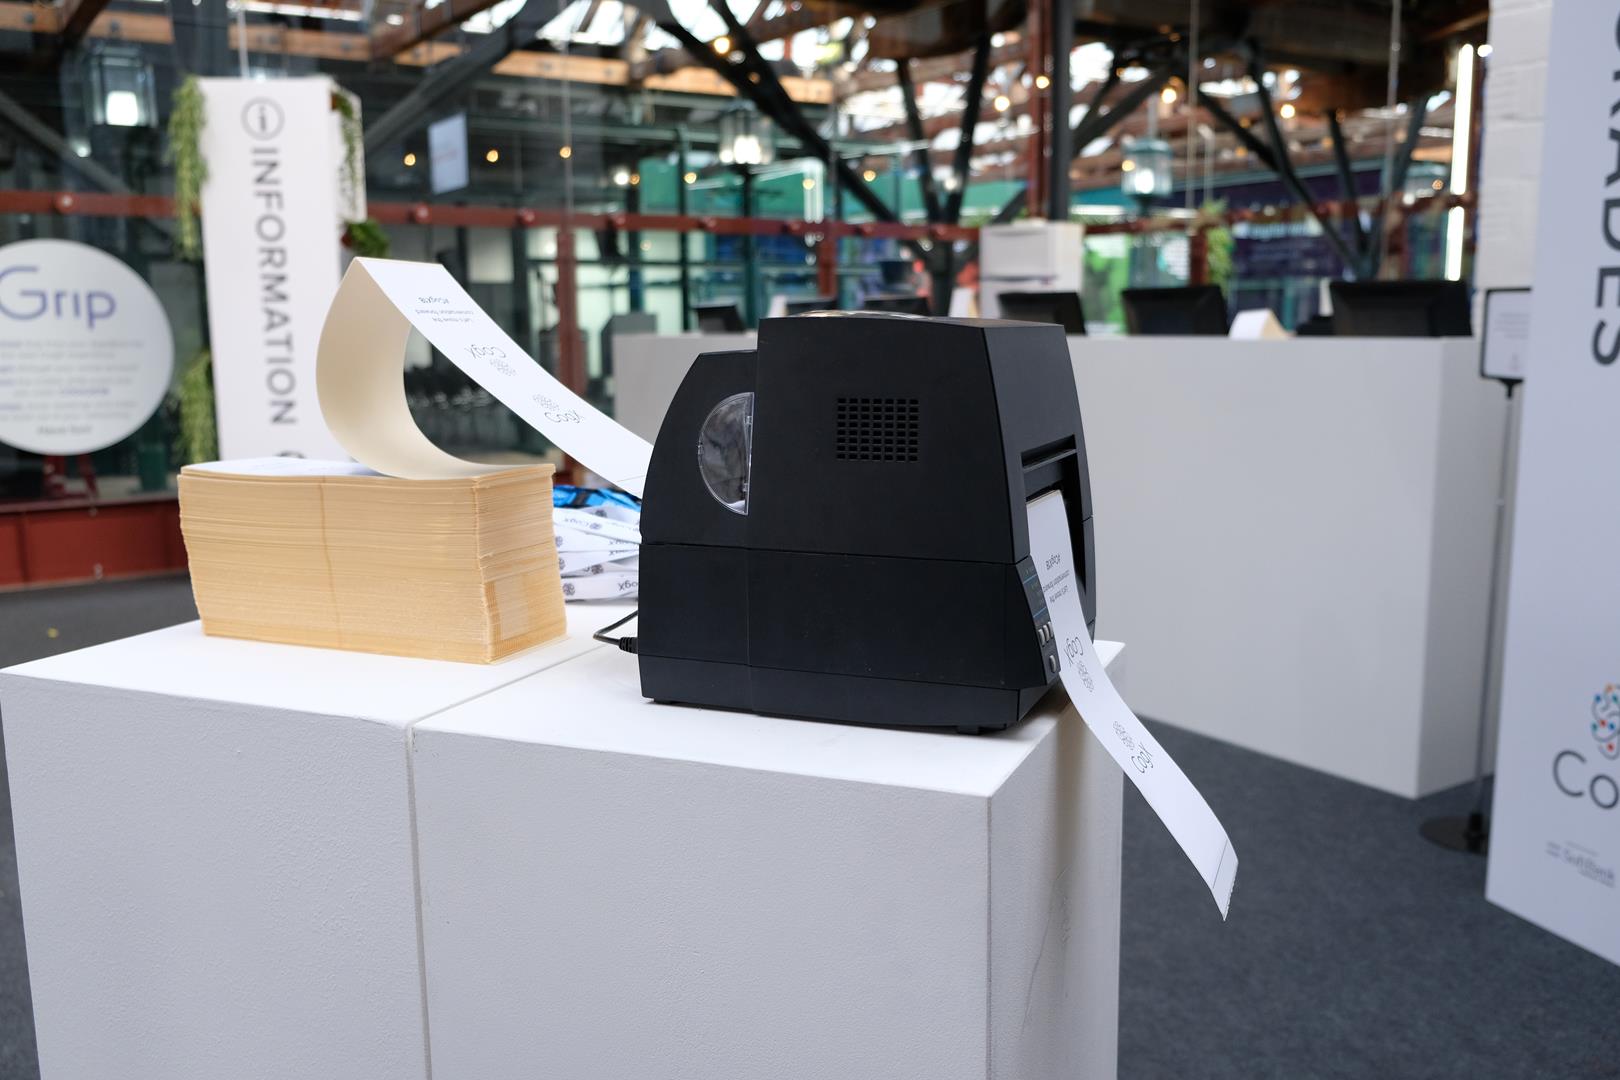 event-connections-expo-badge-printer.JPG